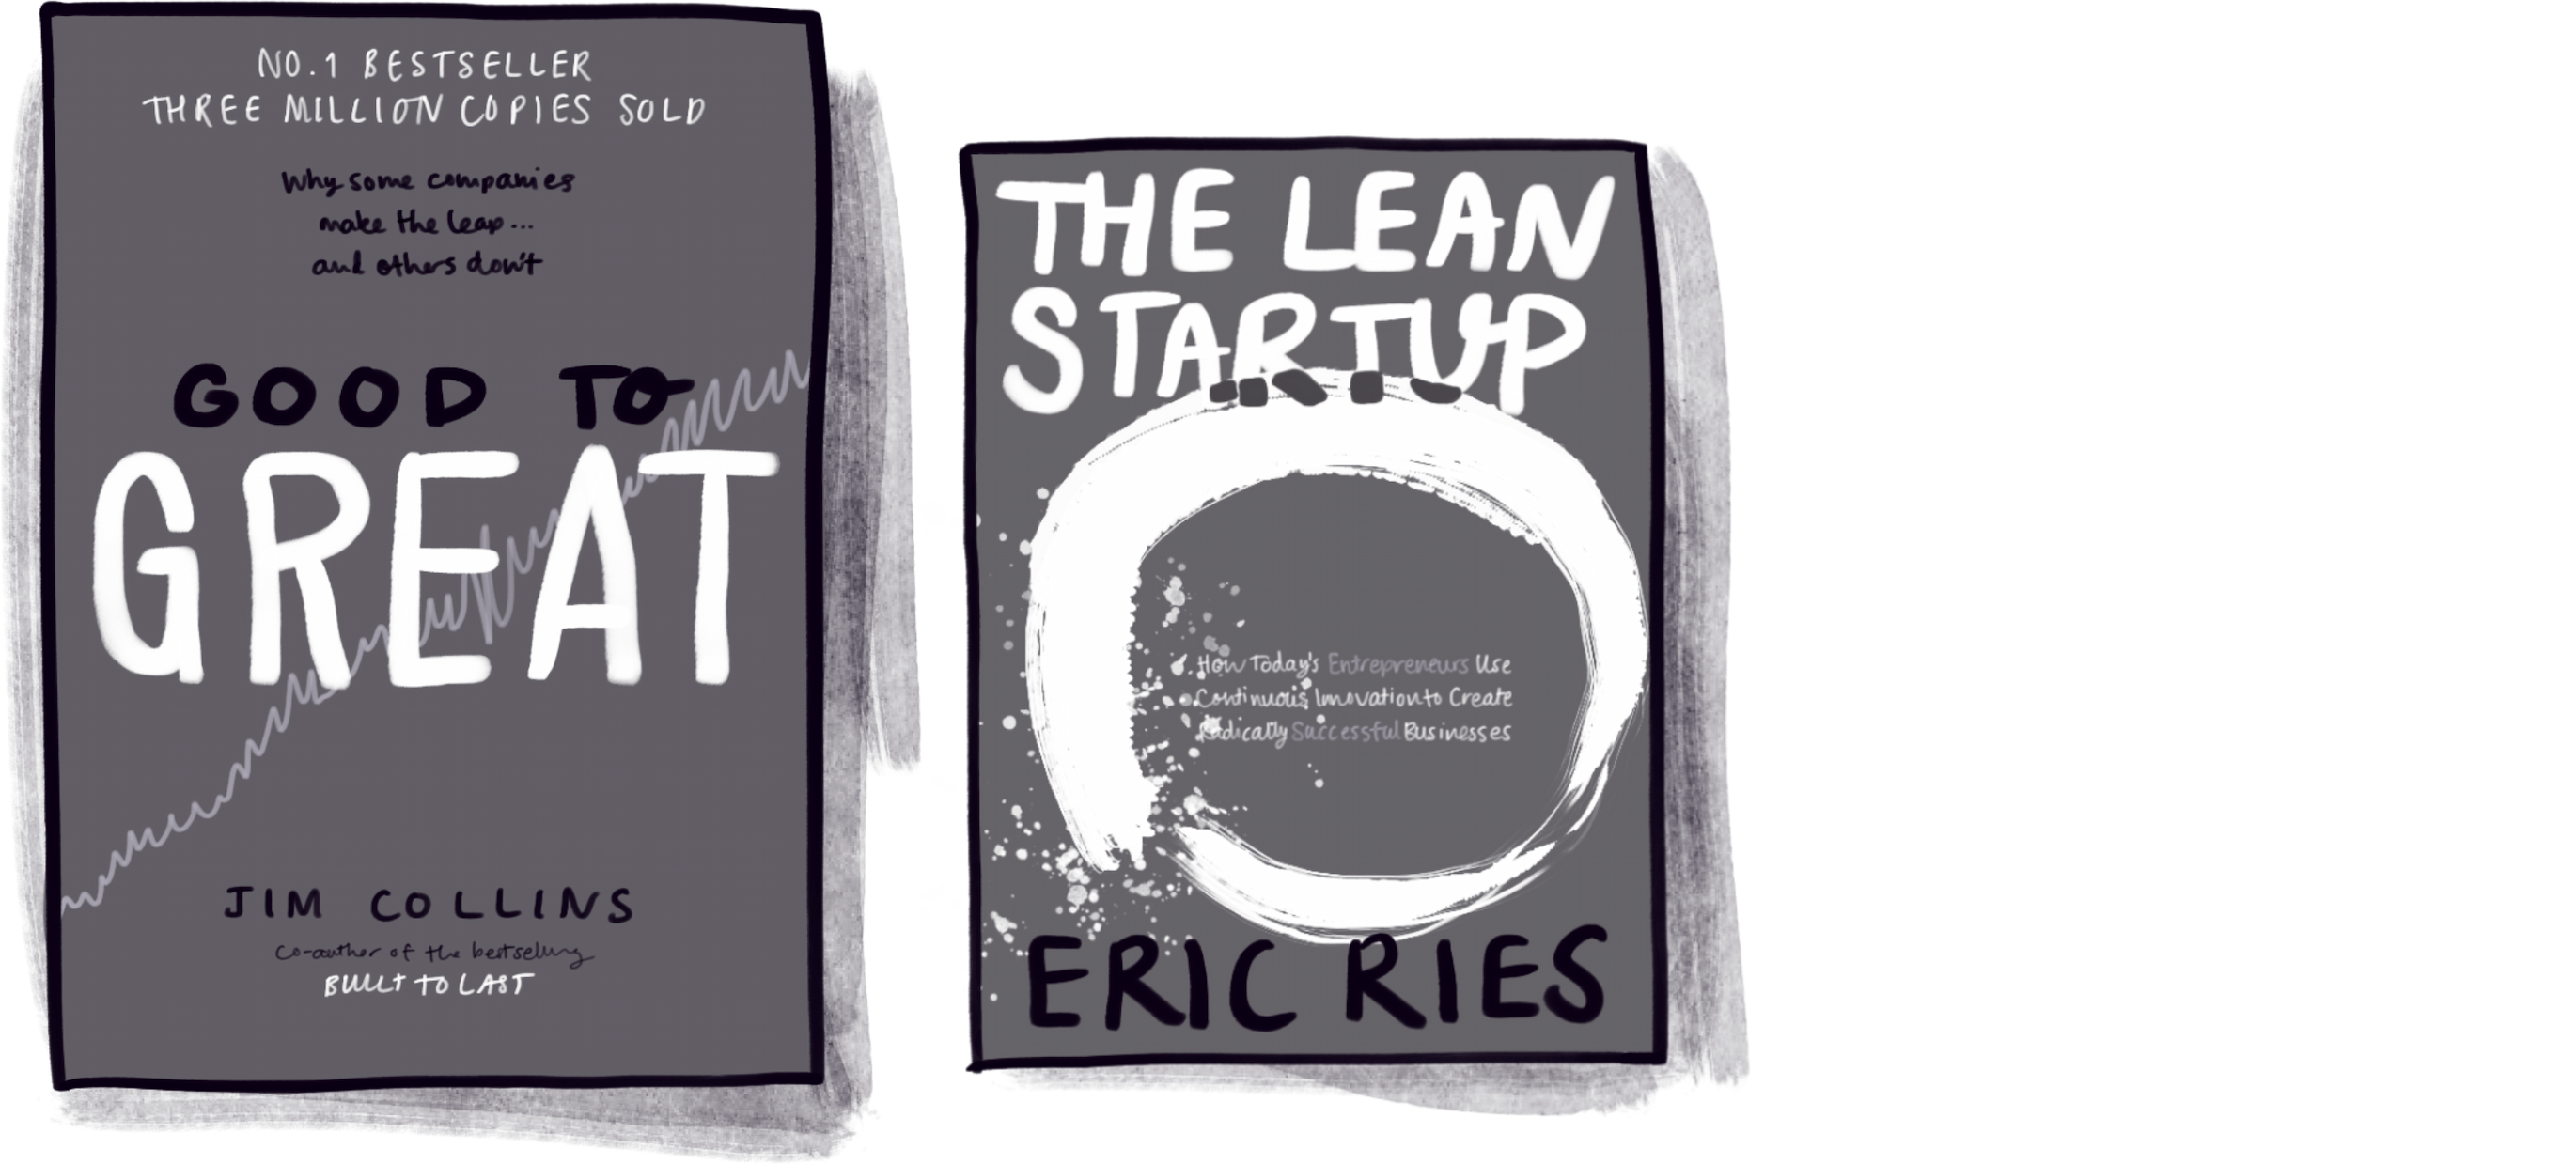 Business books for the Jimmy book list include Lean Startup by Eric Ries, and Good to great by Jim Collins.